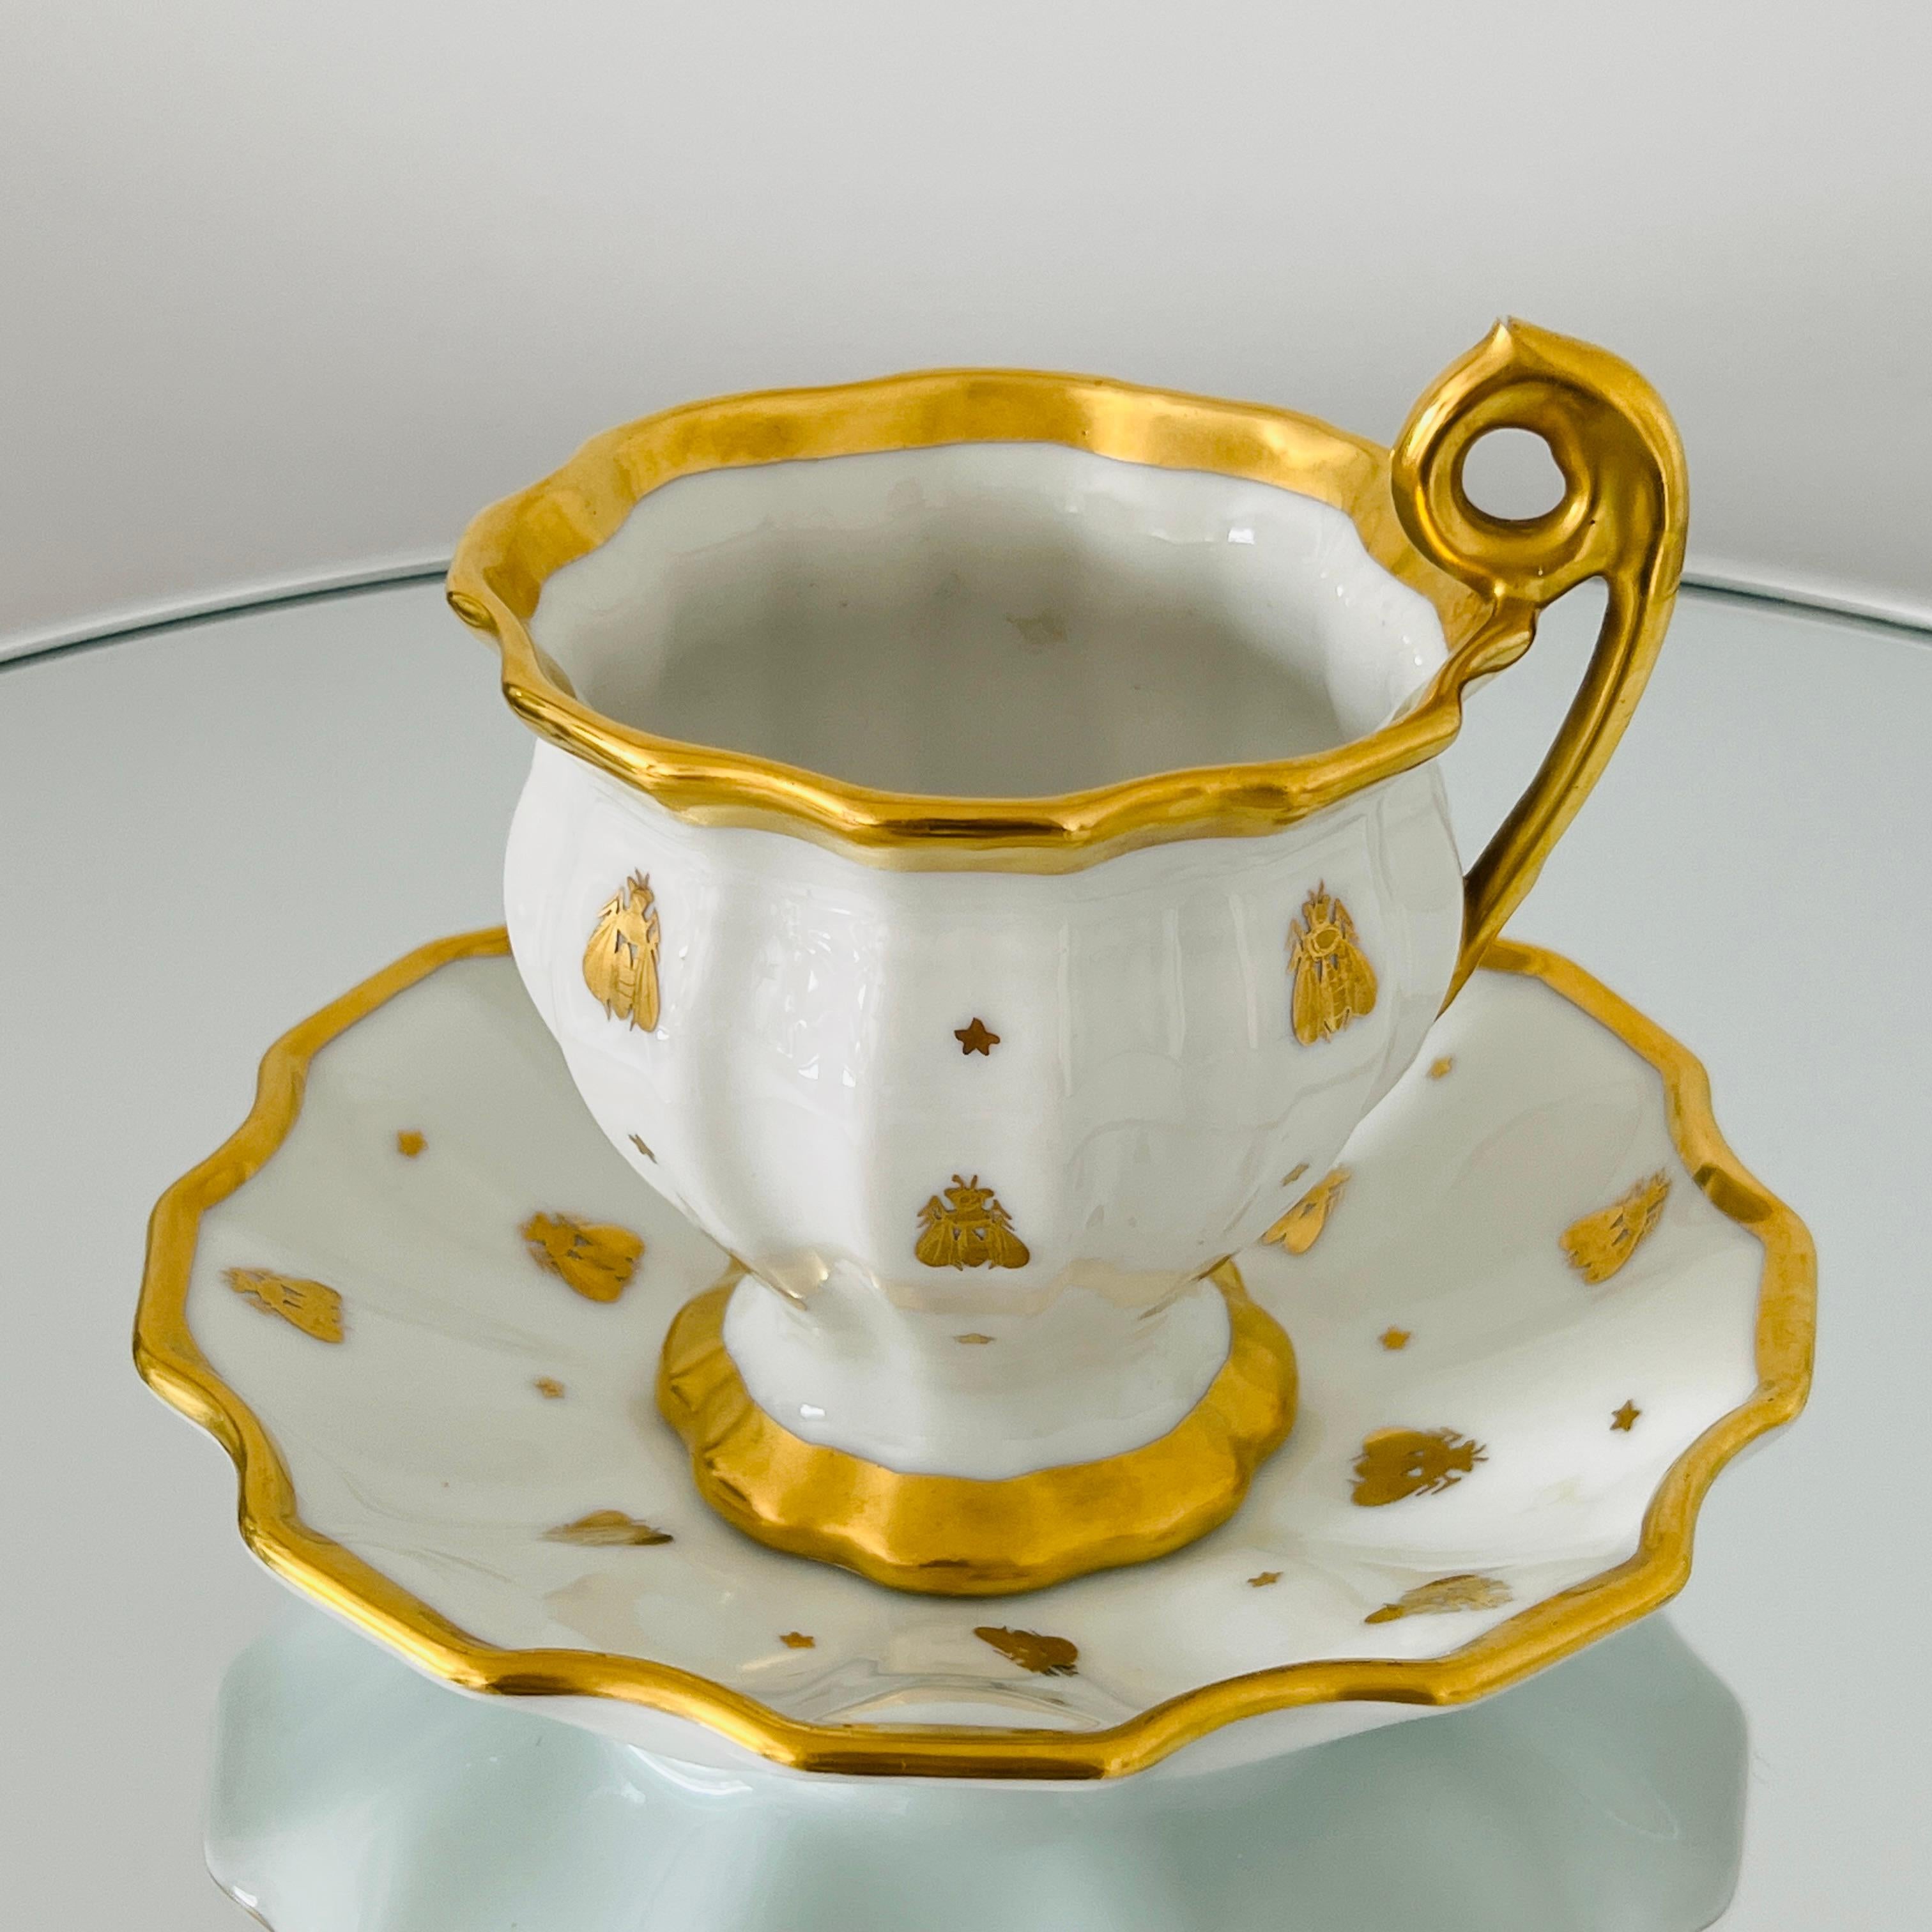 1950s Le Tallec porcelain candy cup with dish set from the Abeilles (Golden Bees) Collection. The Empire pattern features Napoleonic golden bee motif hand painted in 24K gold over fine white porcelain. The cup has a tapered form with fluted sides